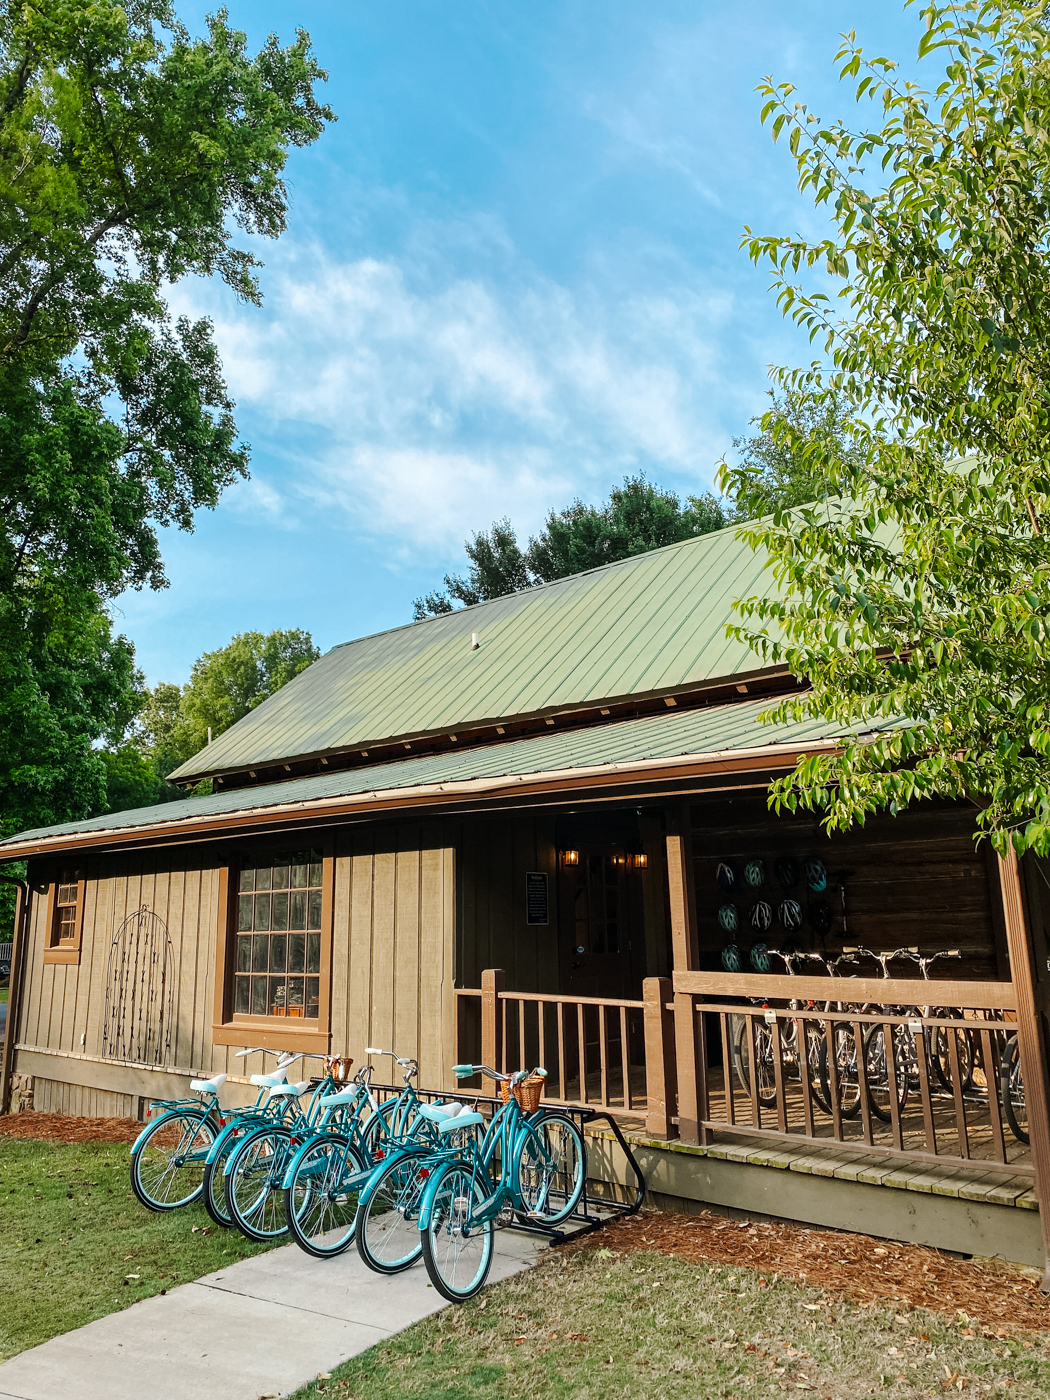 Barnsley Resort by popular Memphis travel blog, Lone Star Looking Glass: image of blue beach cruiser bicycles parked in a row in front of a wooden building with a green metal roof. 